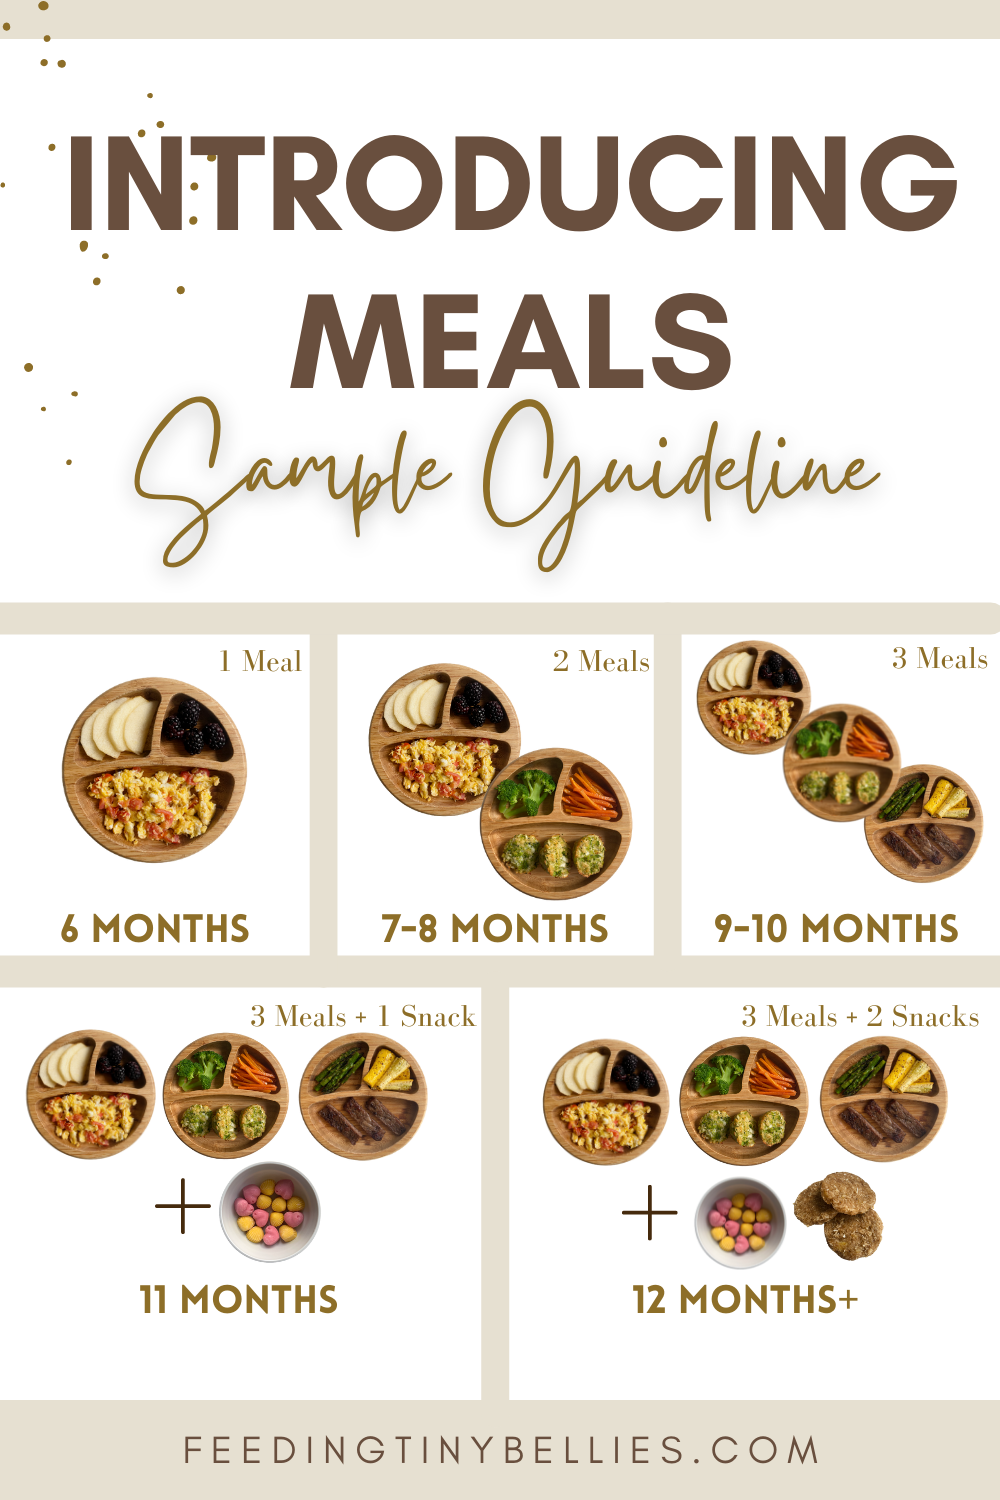 Introducing meals - sample guideline for different age ranges